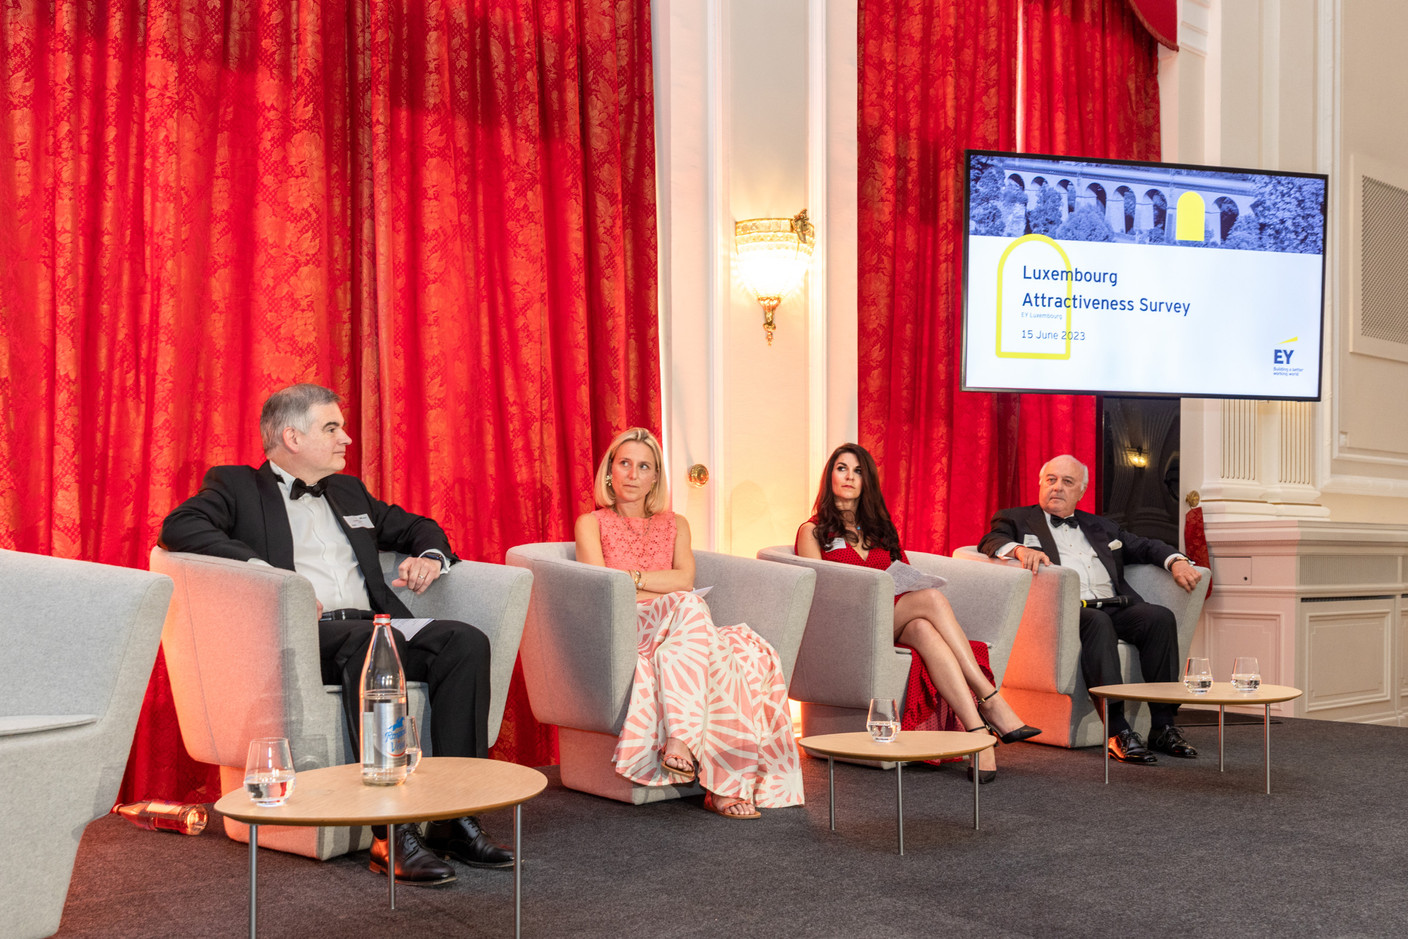 Claude Marx (CSSF), Carole Muller (Fischer), Lize-Mari Barnes (Swiss Re), Norbert Becker (serial entrepreneur) during a panel discussion at a gala dinner to launch EY Luxembourg's 2023 attractiveness survey, held at the Cercle Cité on 15 June. Photo: Romain Gamba/Maison Moderne